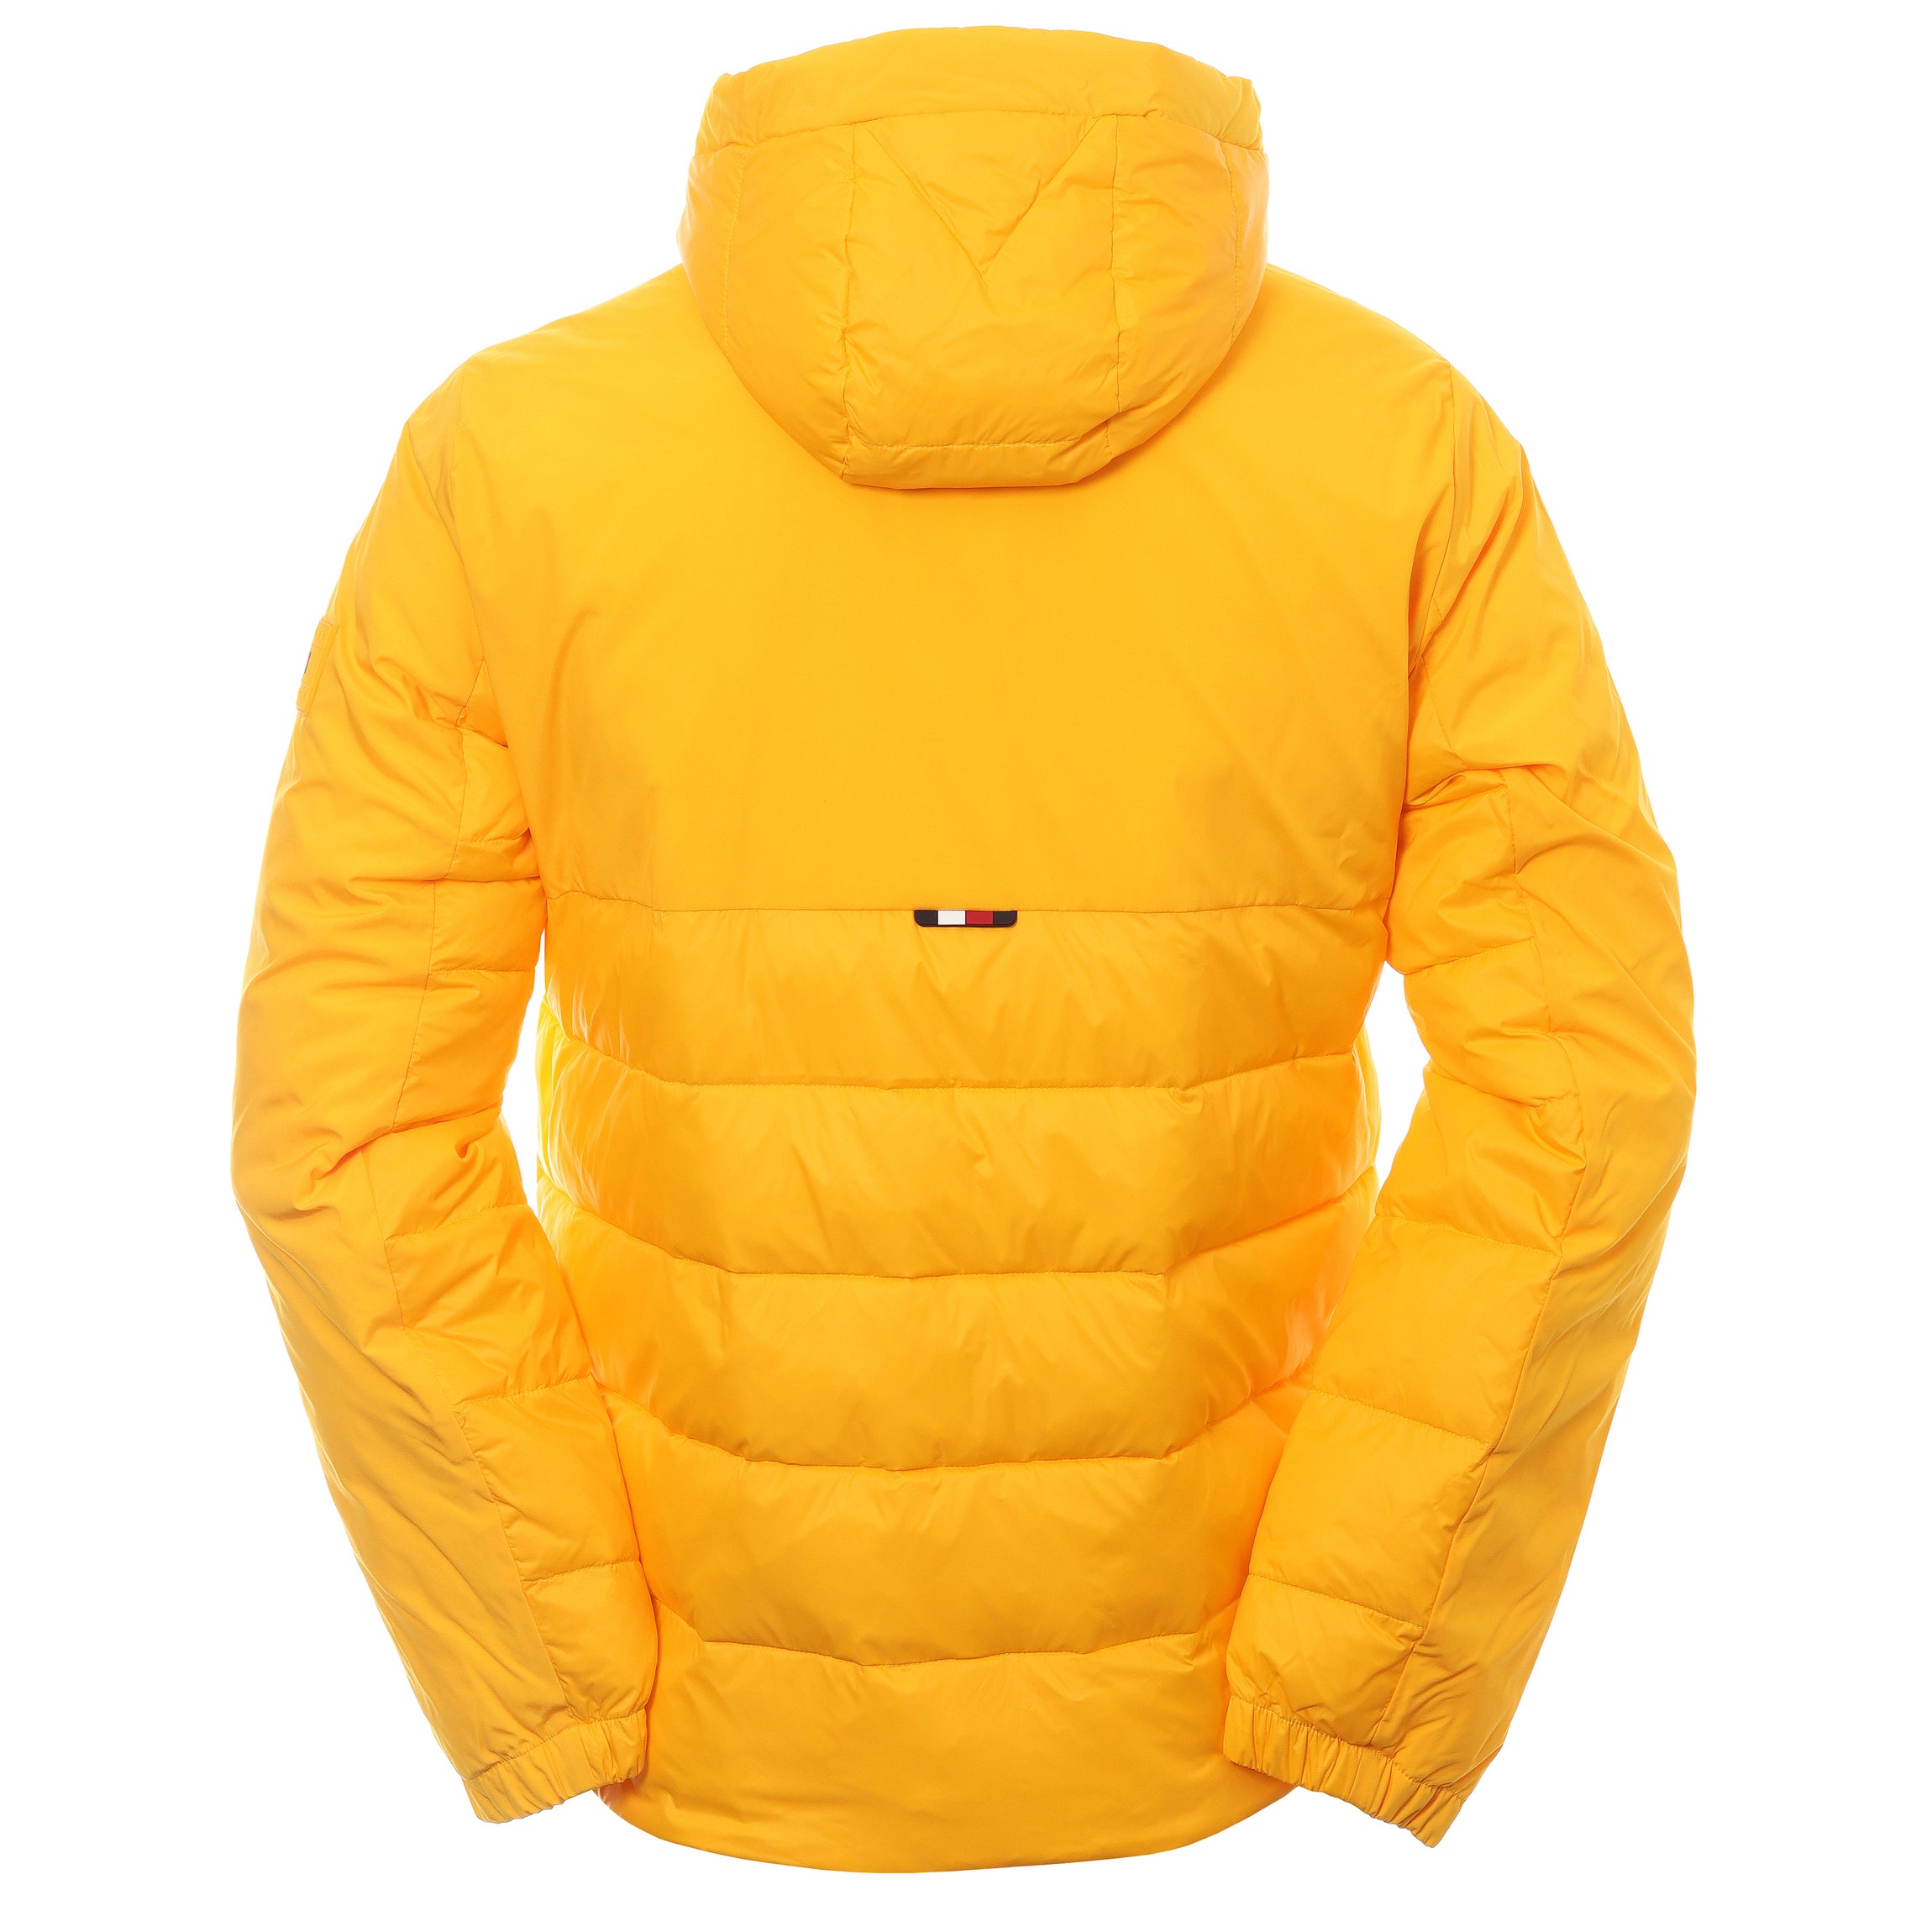 Hooded | Hilfiger Media Tommy MW0MW28993 Jacket ZEW Solstice Function18 Mixed